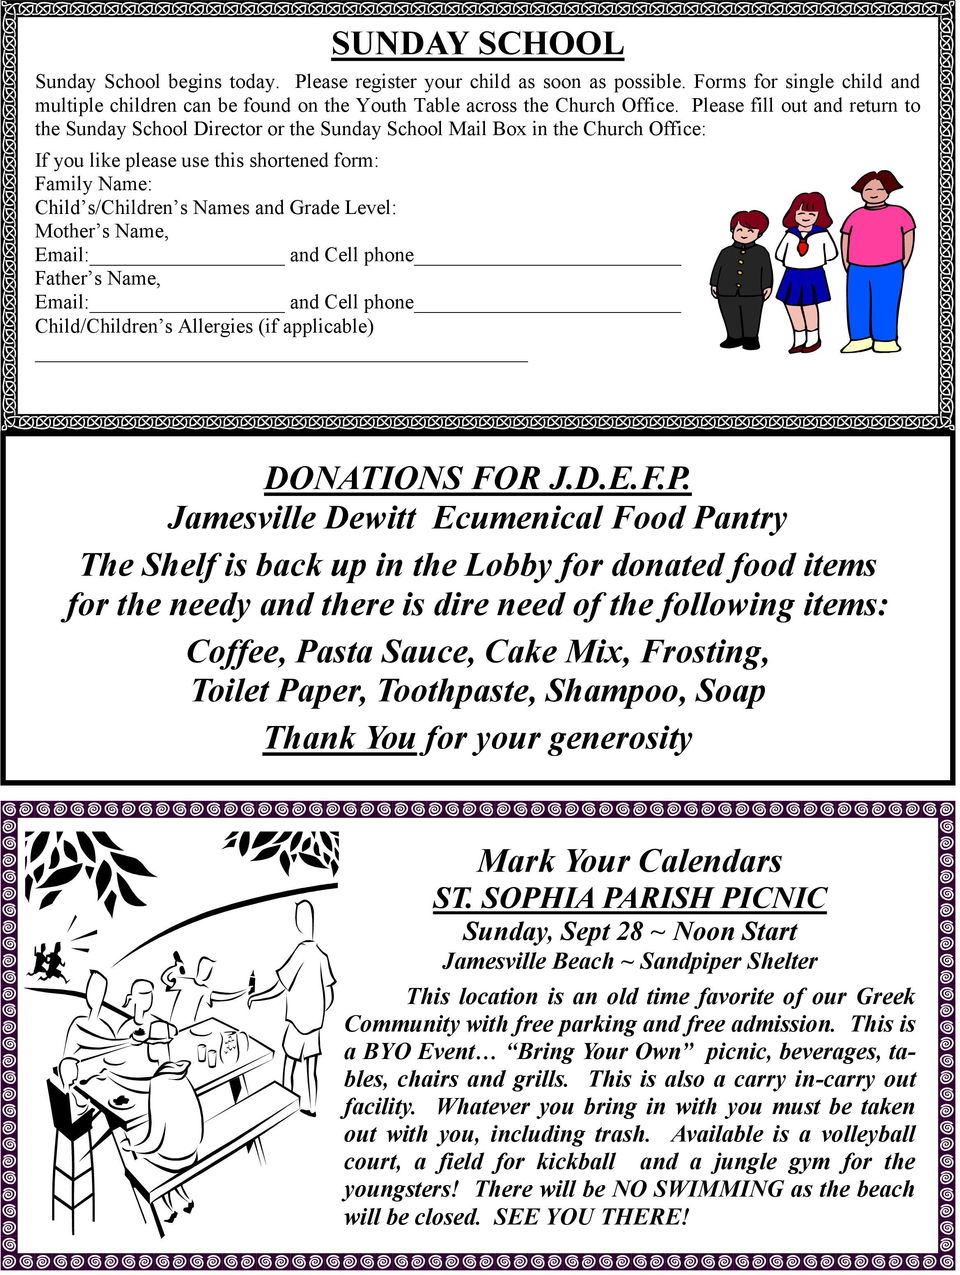 Grade Level: Mother s Name, Email: and Cell phone Father s Name, Email: and Cell phone Child/Children s Allergies (if applicable) DONATIONS FOR J.D.E.F.P.